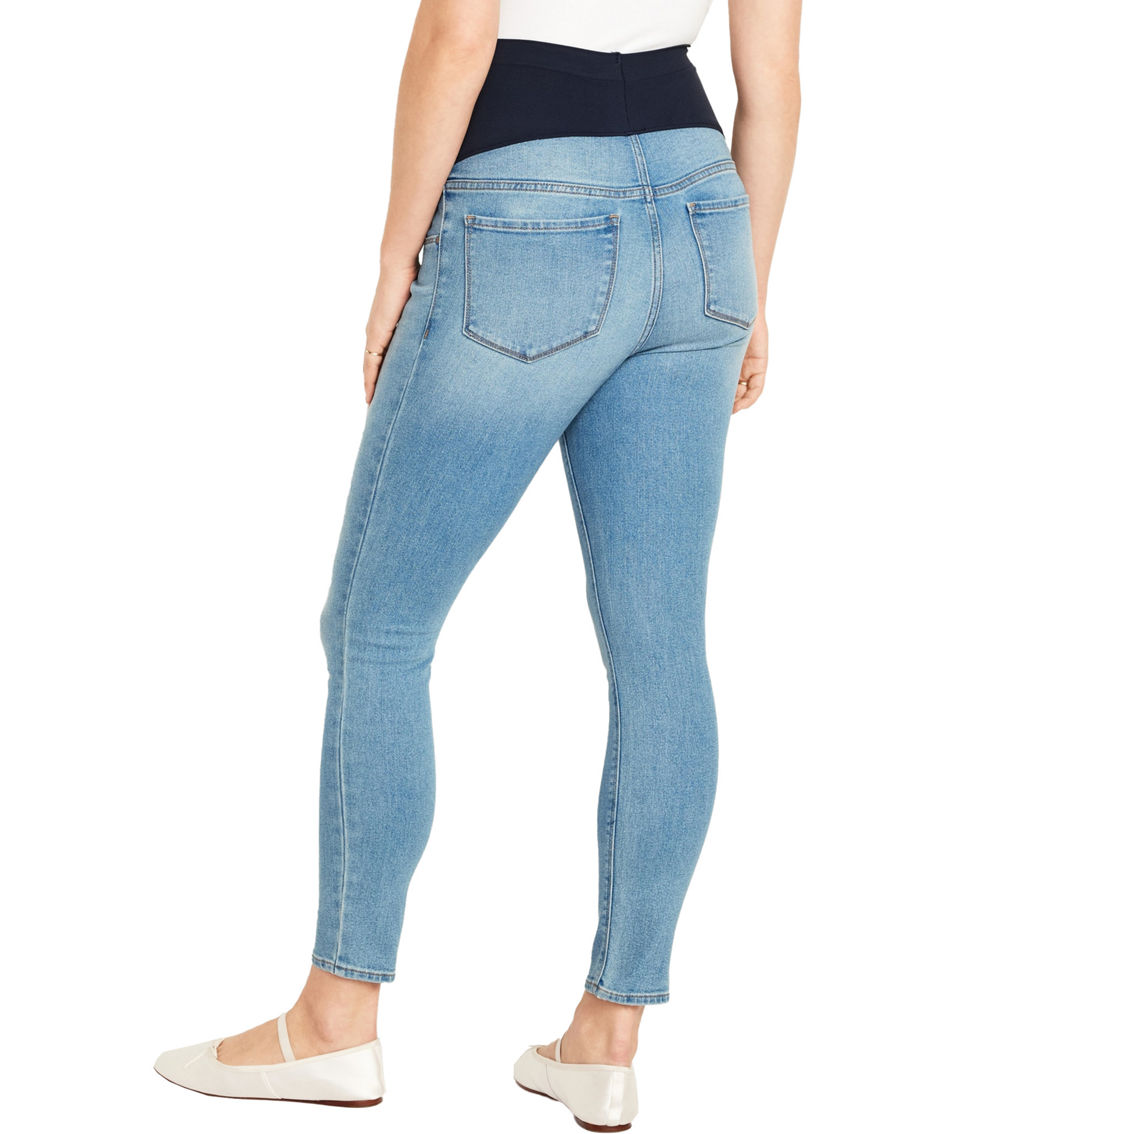 Old Navy Maternity Full-Panel Wow Light Wash Skinny Jeans - Image 2 of 4